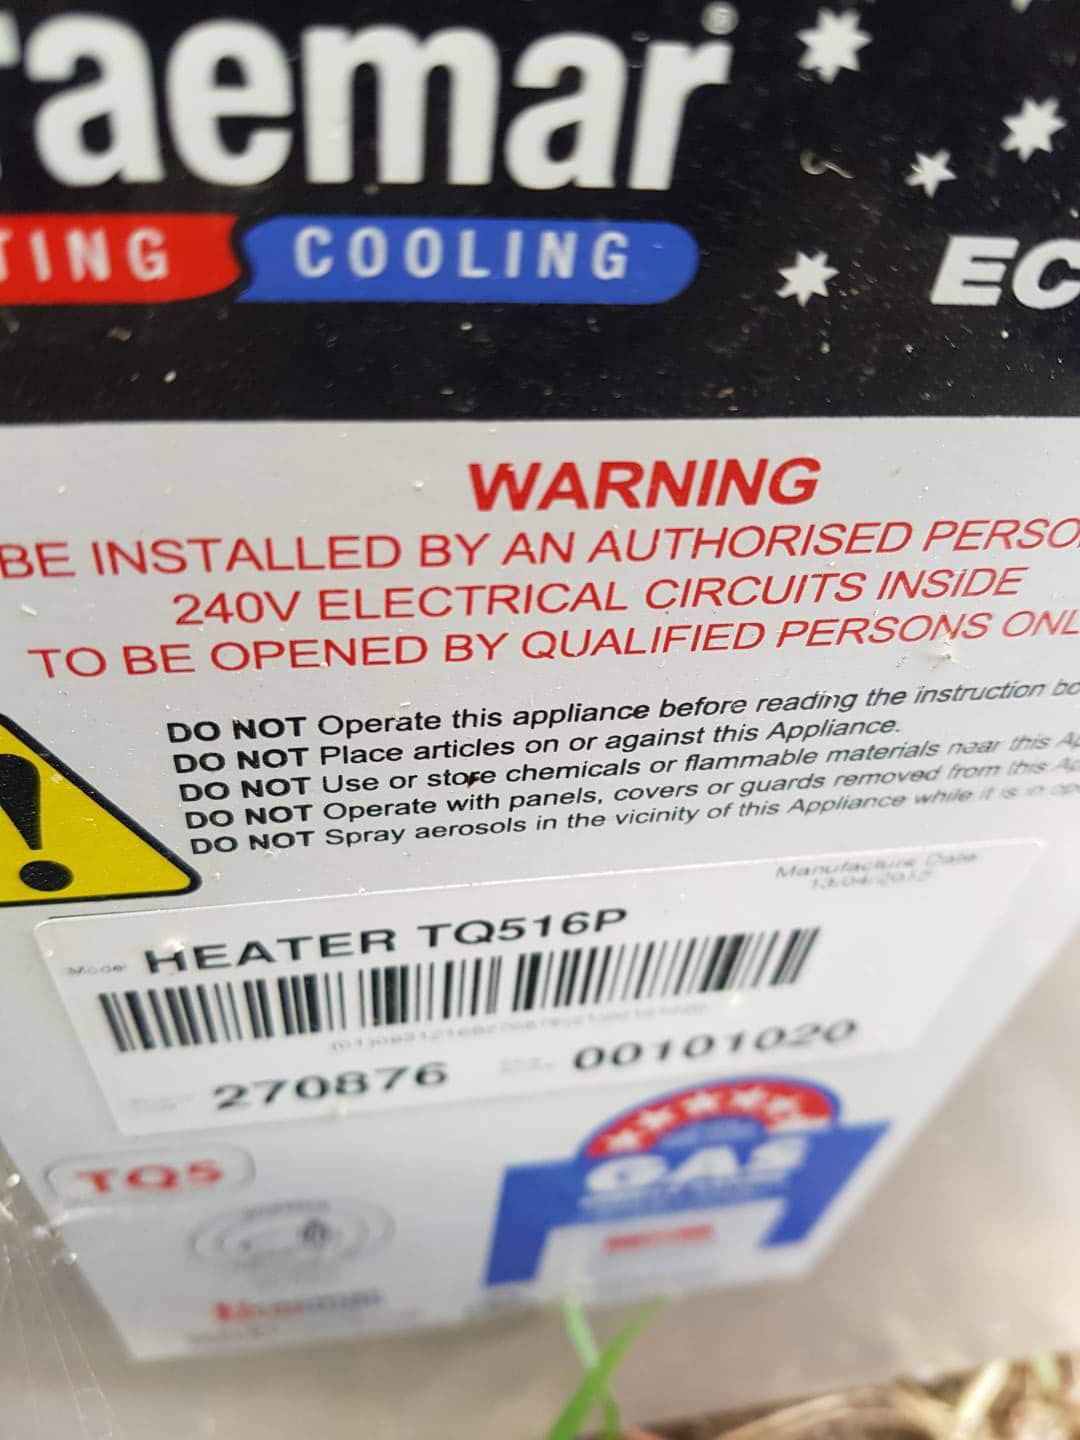 Braemar gas ducted heater warning label